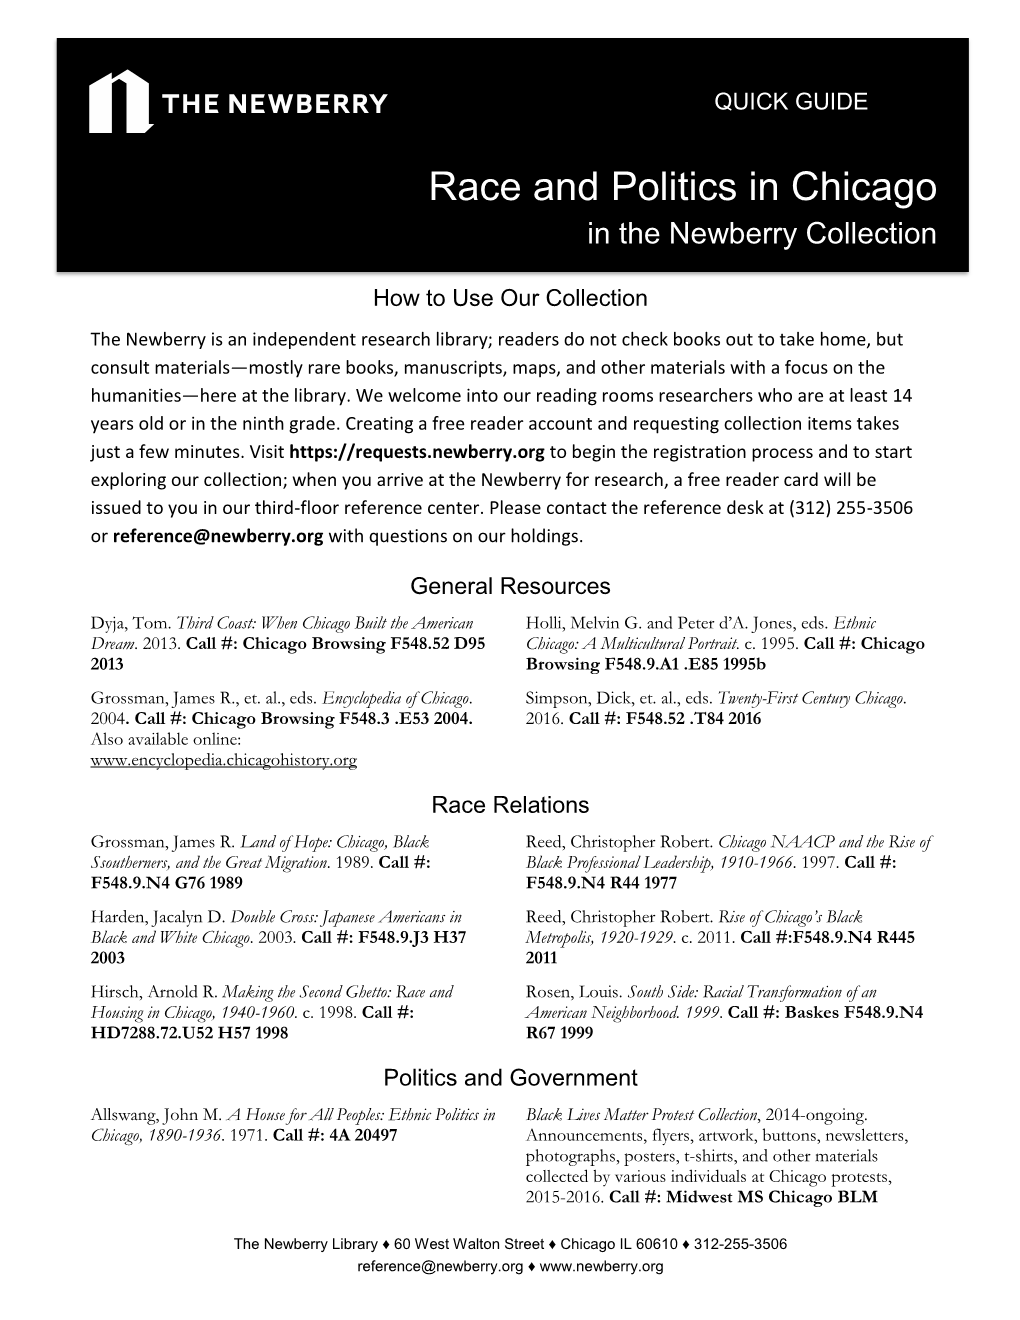 Race and Politics in Chicago